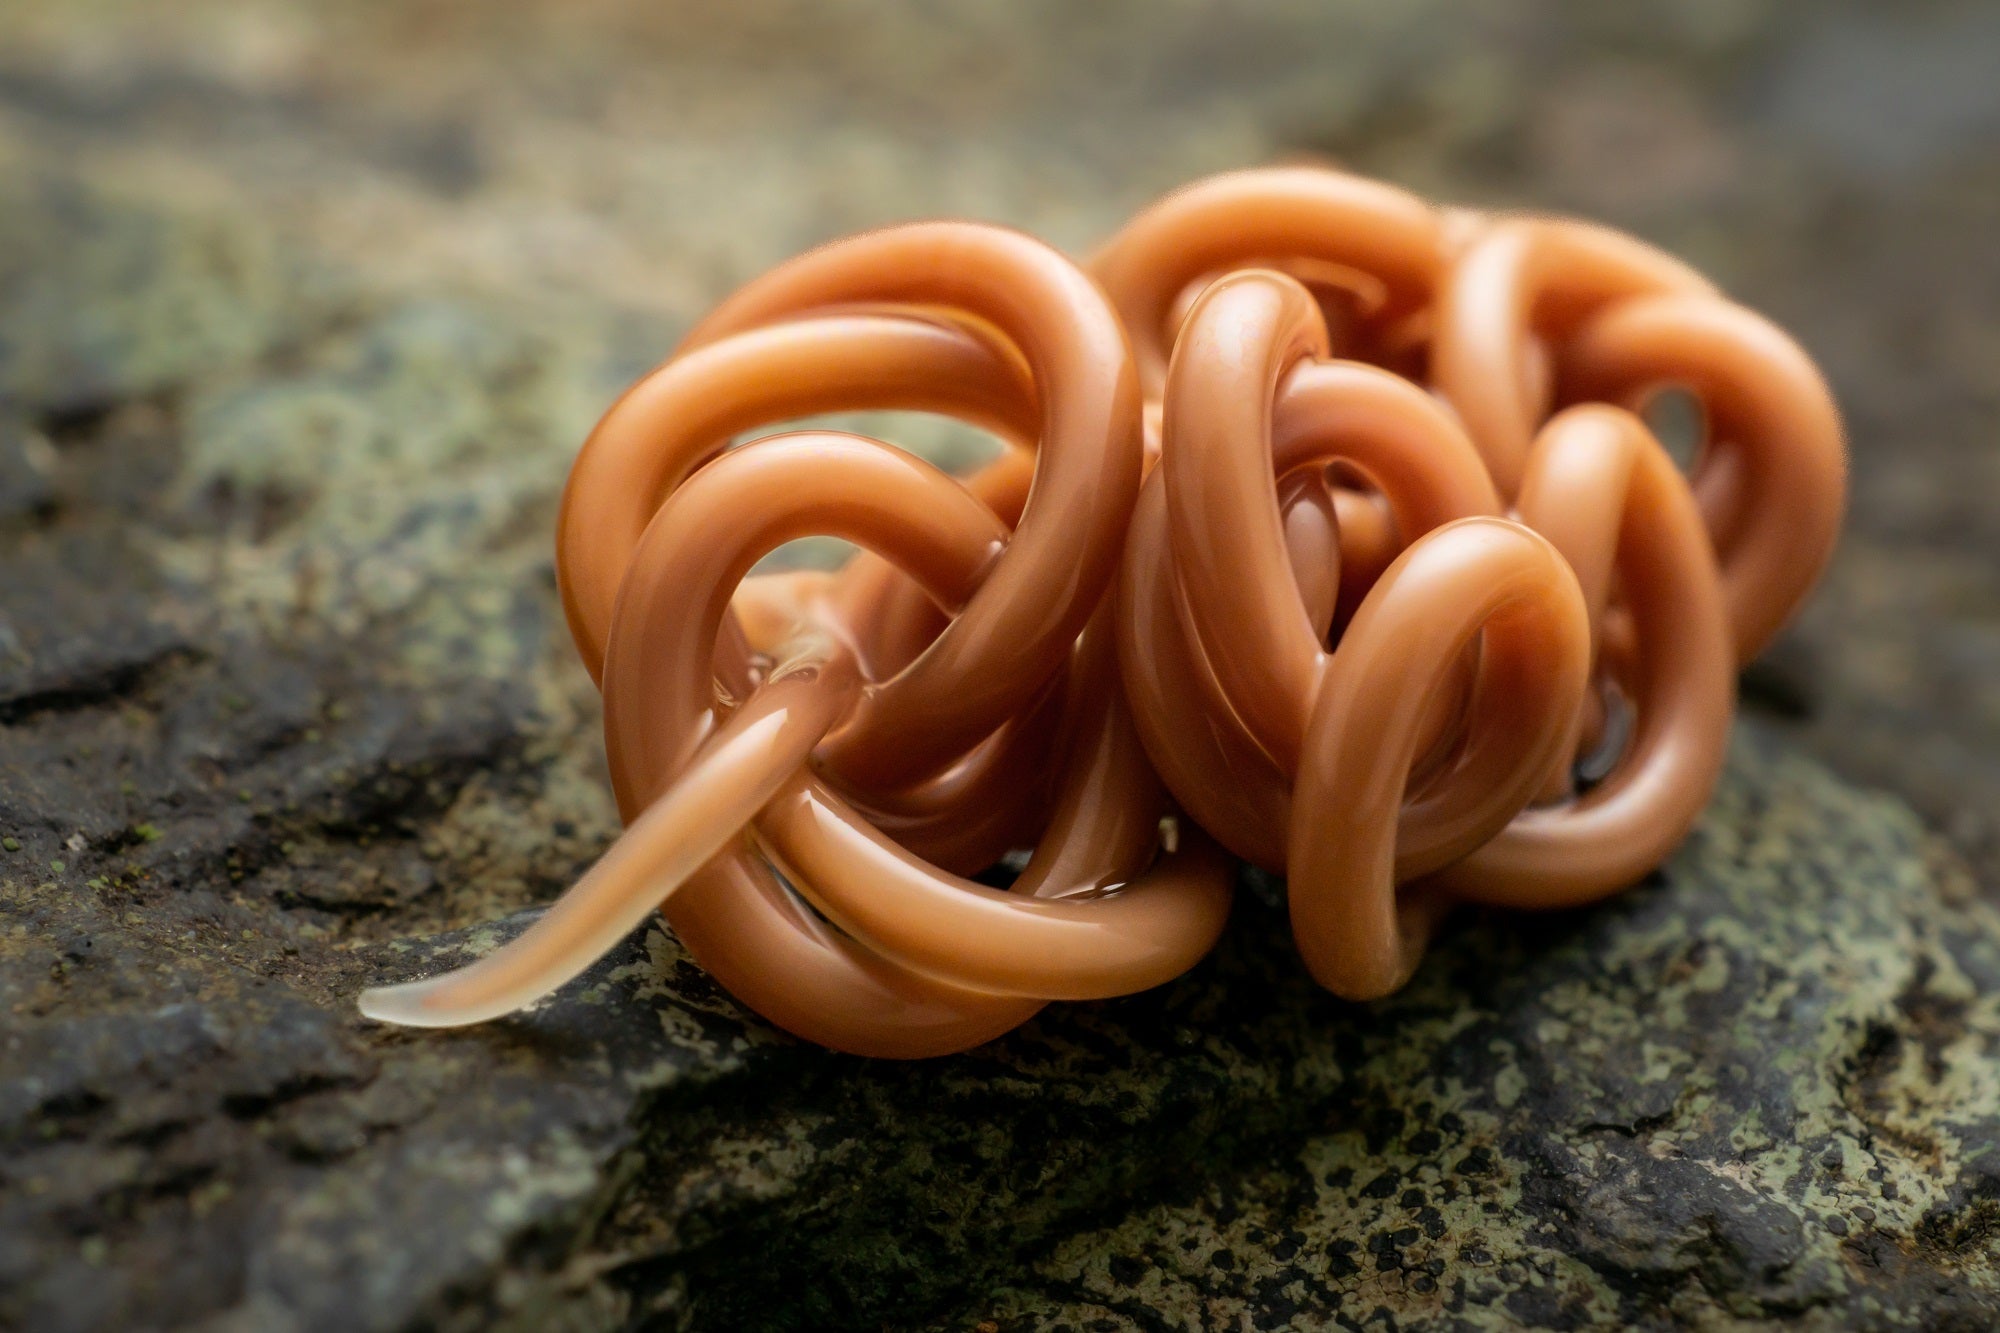 Pink worm making knots on a rock capture for photography awards